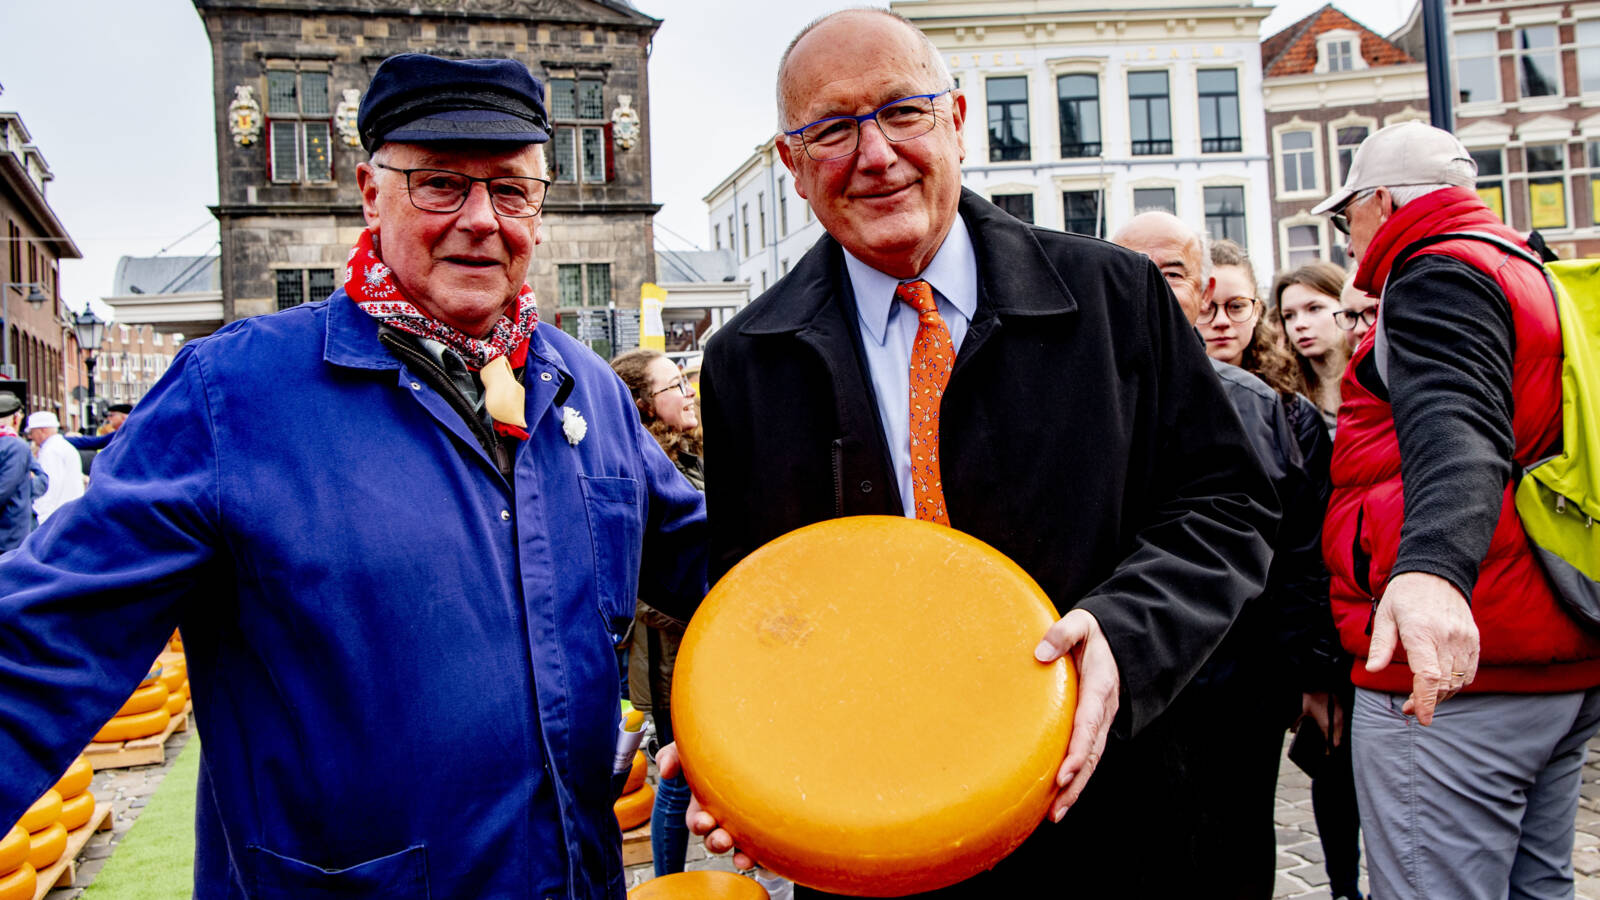 Trump's ambasador Pete Hoekstra with Gouda cheese in 2018, ANP photo